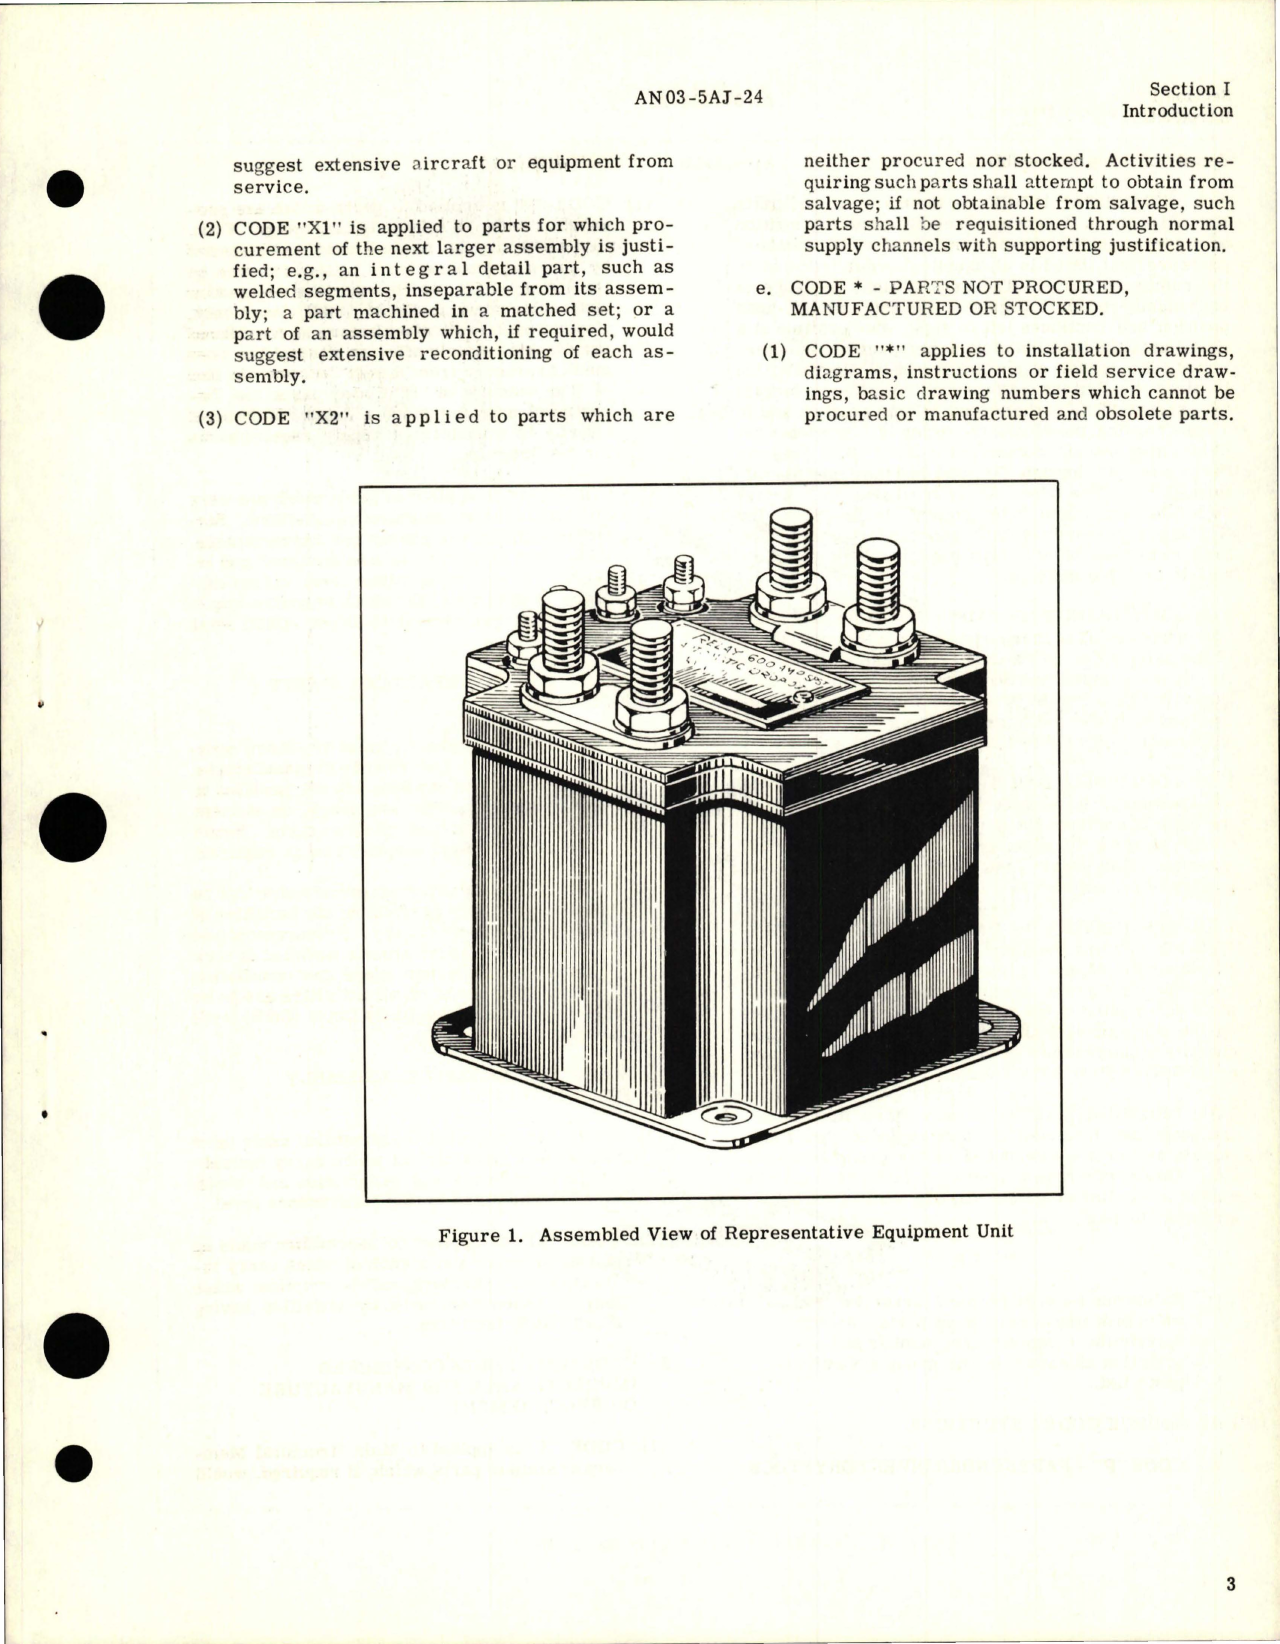 Sample page 5 from AirCorps Library document: Illustrated Parts Breakdown for Dropout Relay - Model A-711J and A-711K